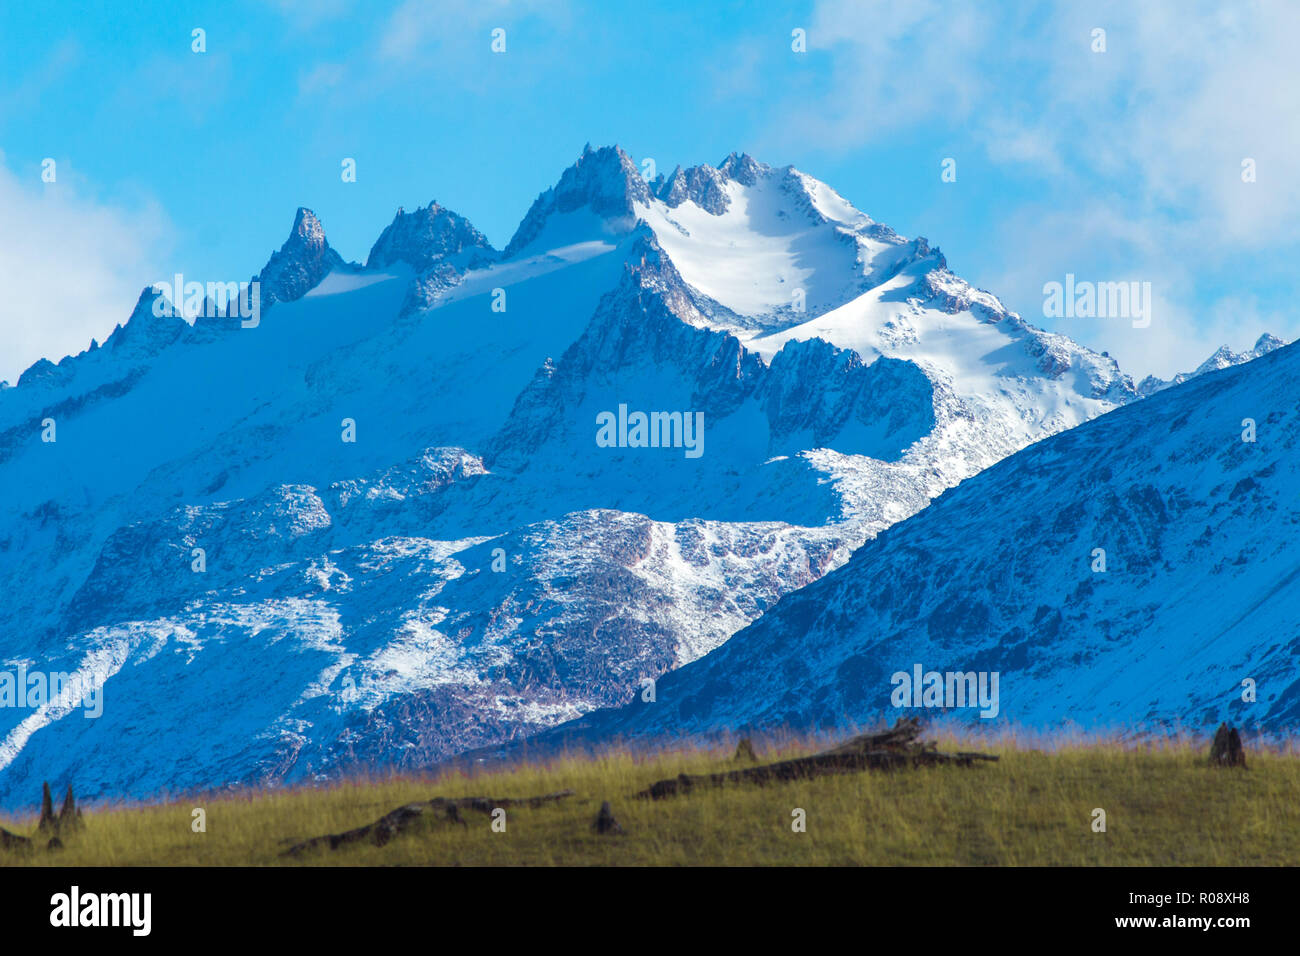 green grass fieldn and wood logs in front of the snowy mountans oh Cerro Castillo Stock Photo